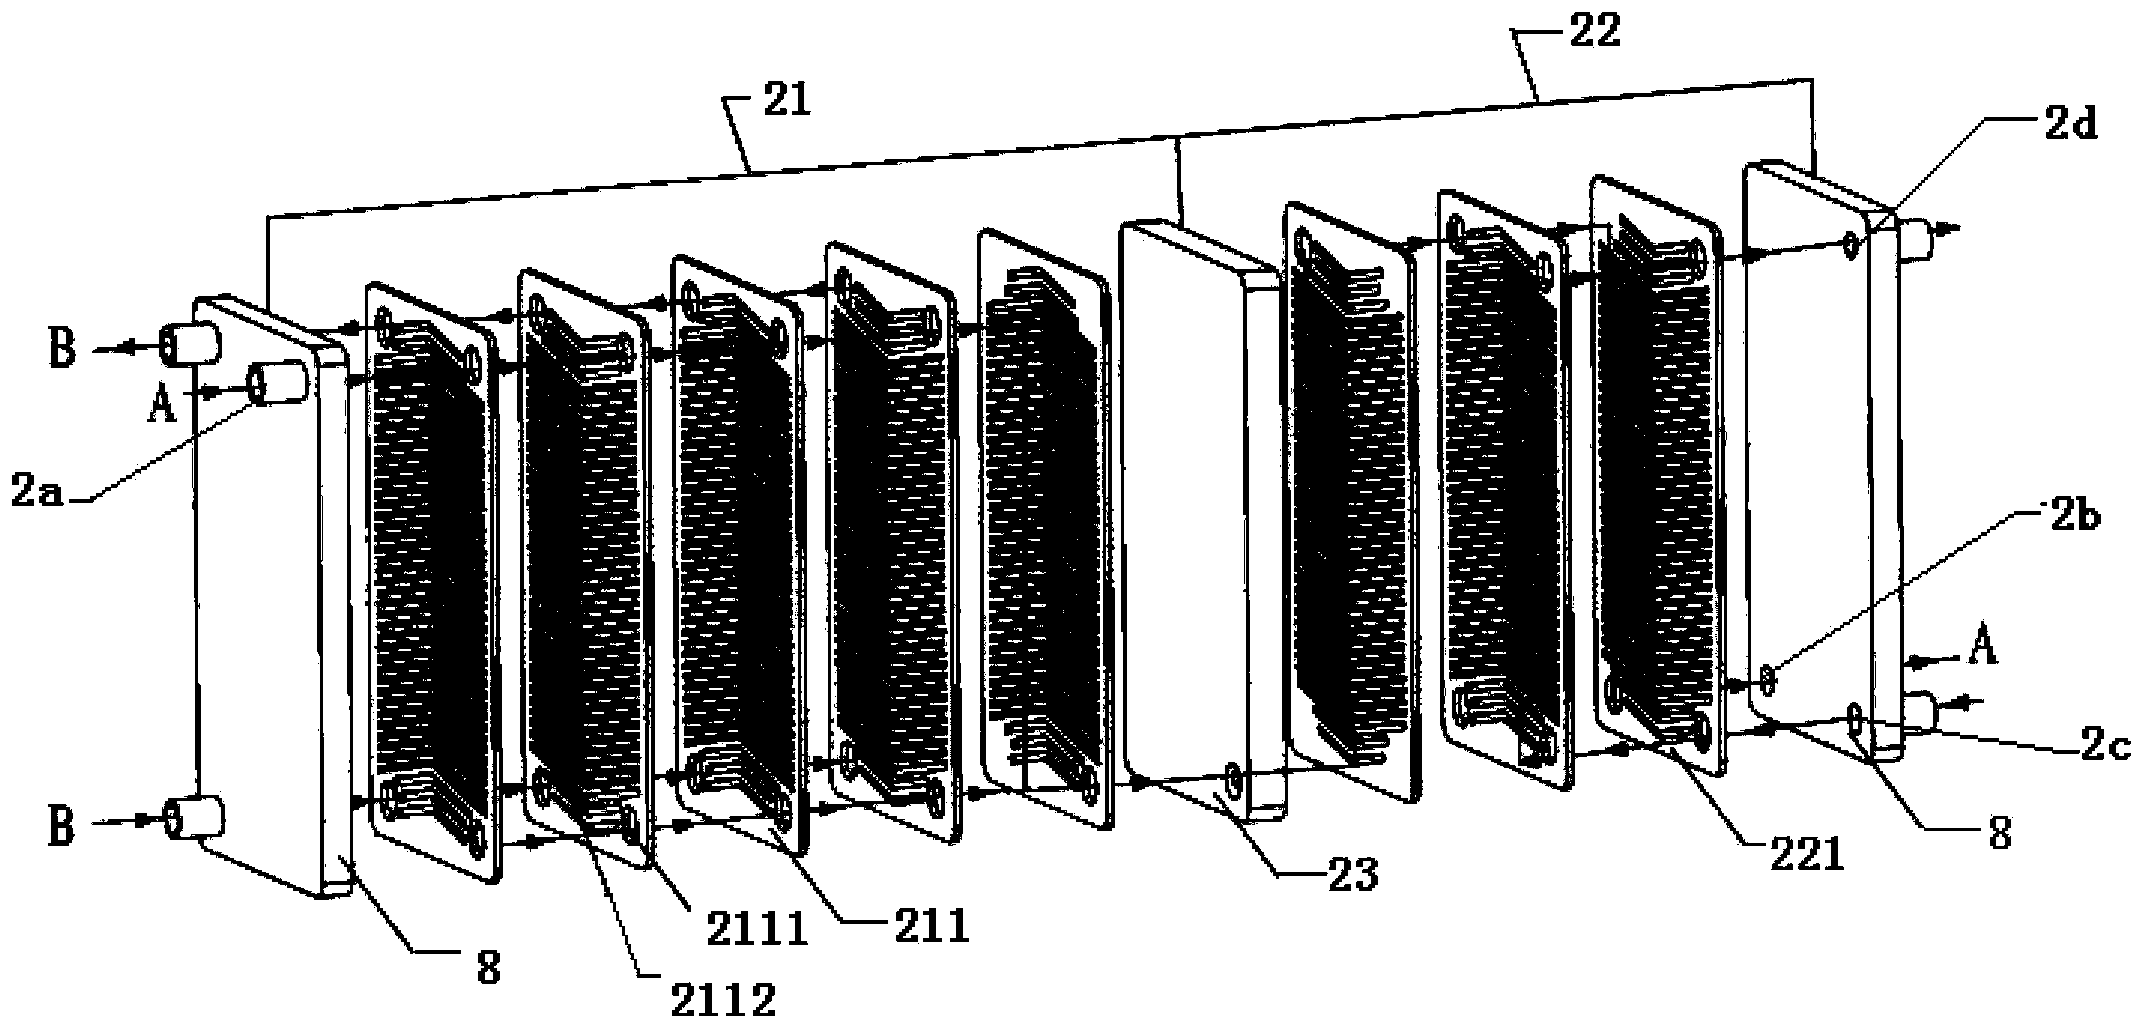 Air-conditioning heat exchange system